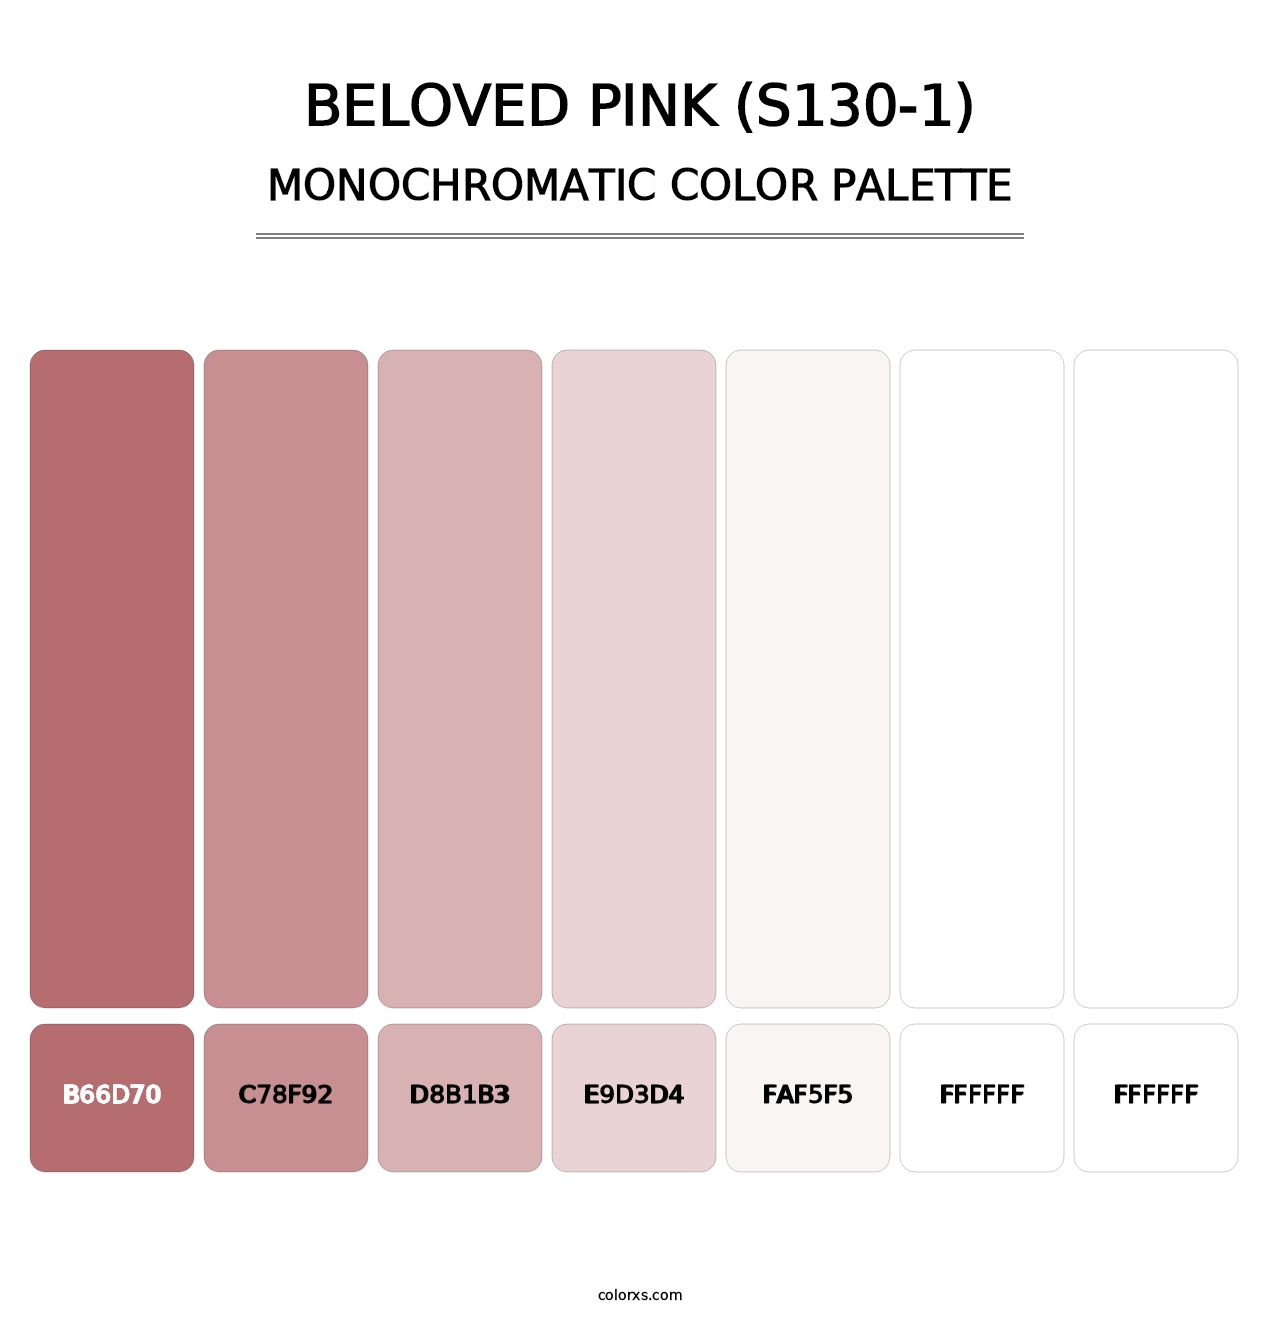 Beloved Pink (S130-1) - Monochromatic Color Palette